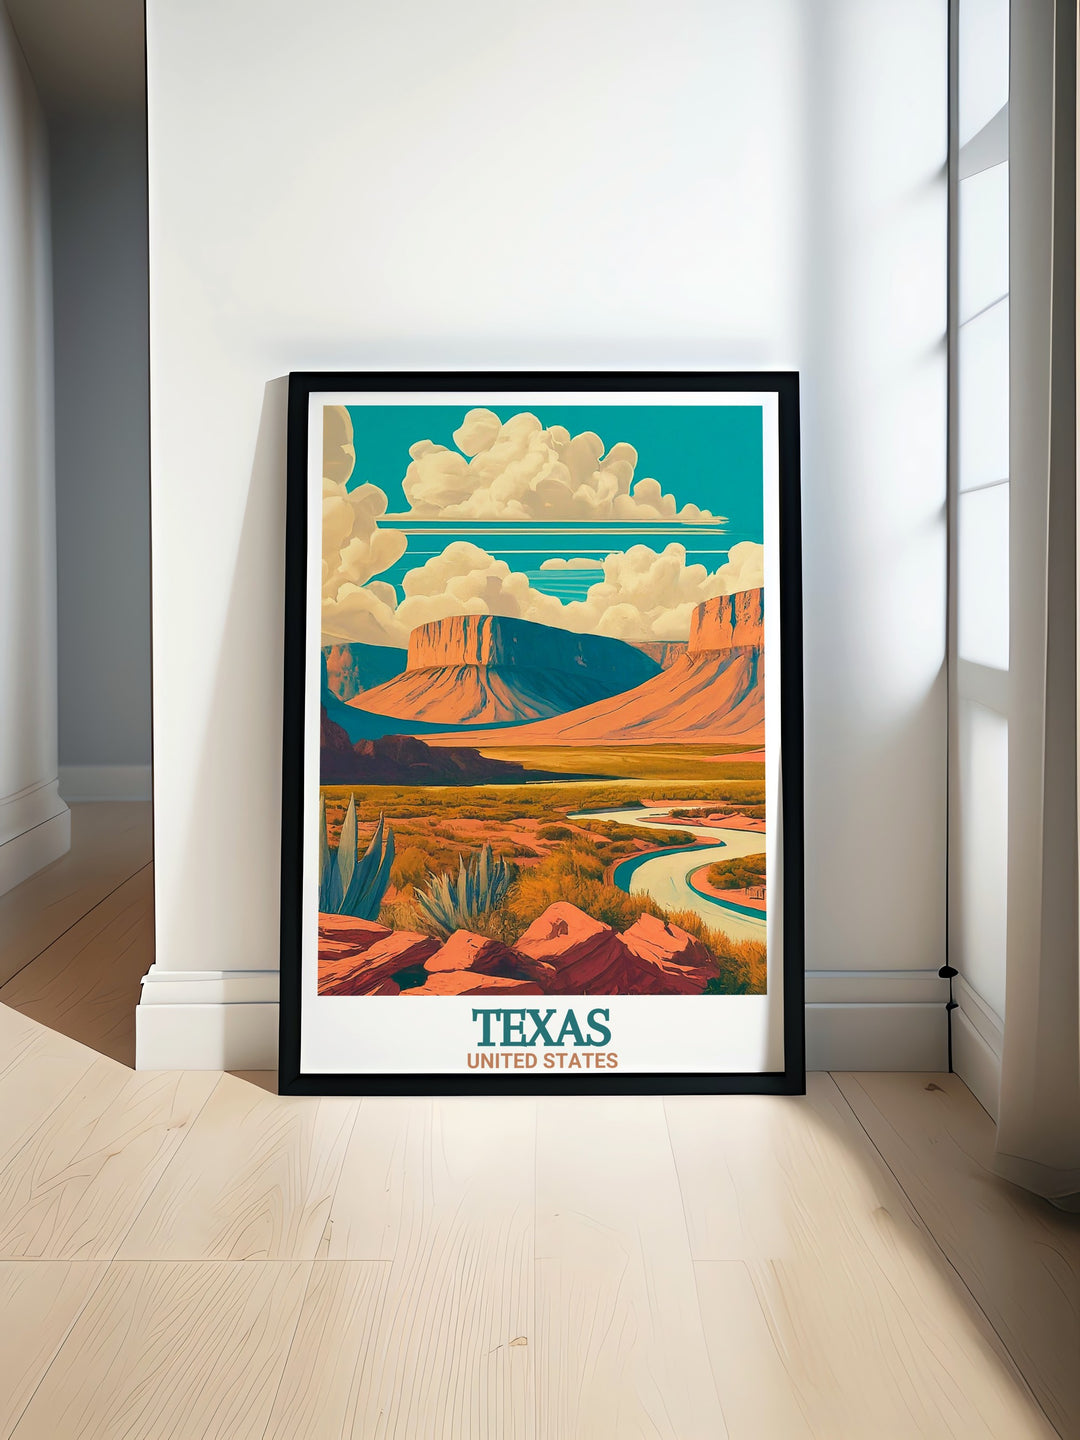 Guadalupe Mountains National Park Poster featuring El Capitan and Guadalupe Peak Texas. Perfect for your home decor. This vibrant print showcases the natural beauty of Big Bend National Park and the desert landscape of Texas USA.